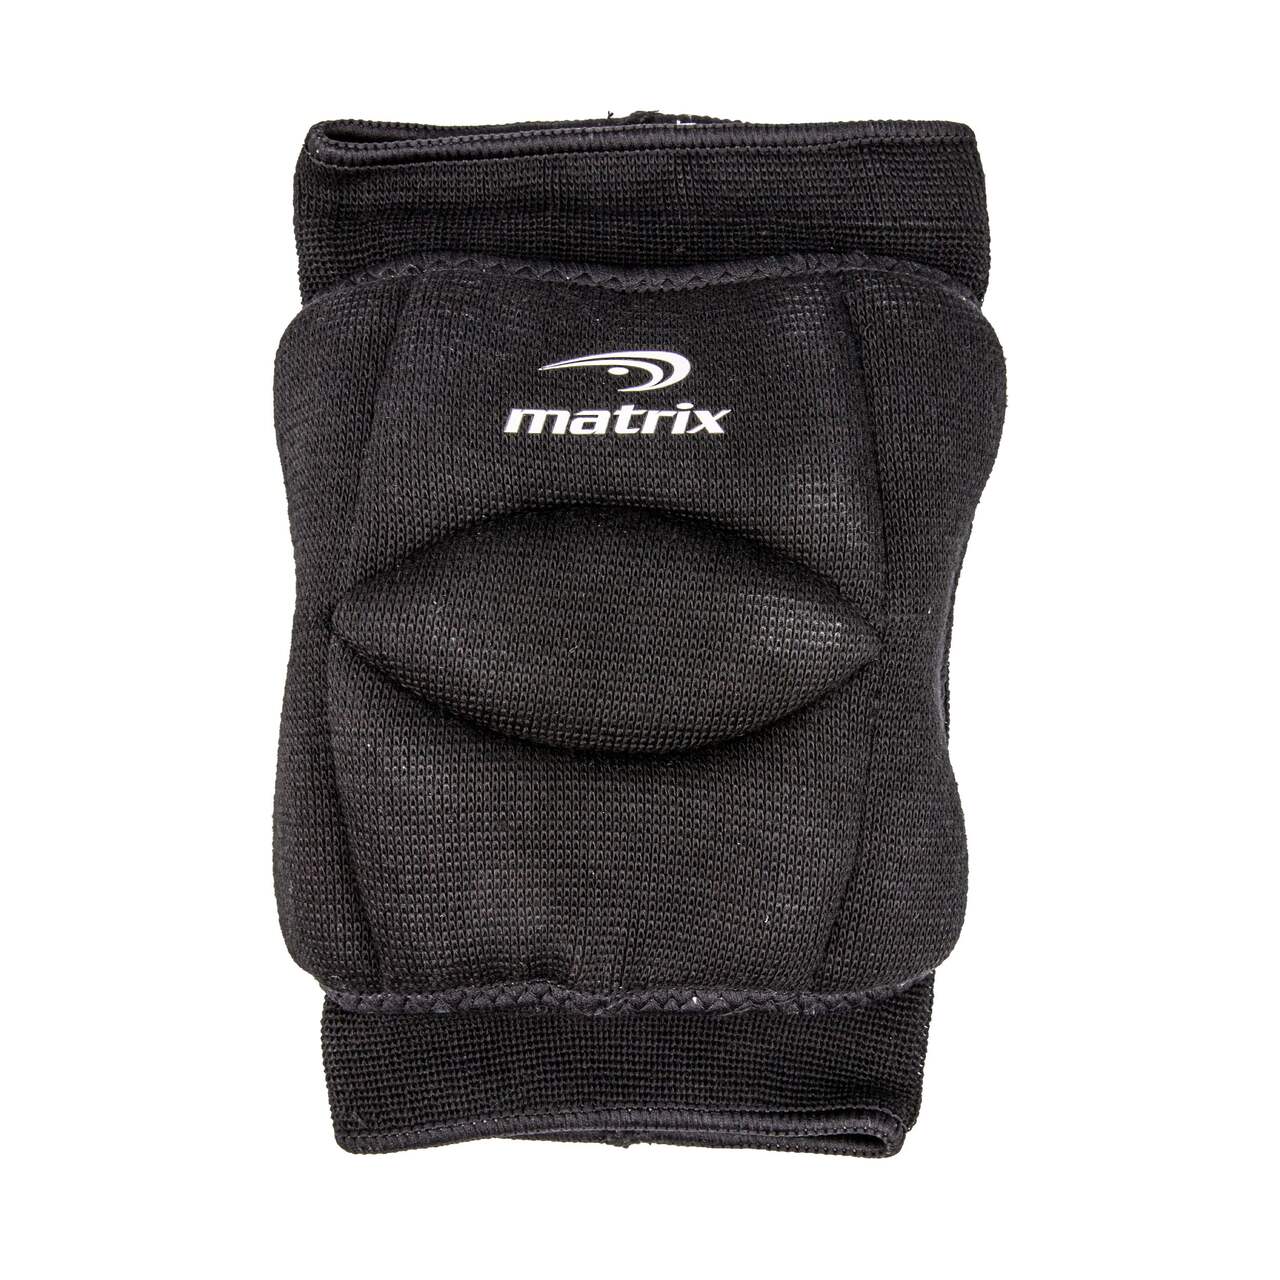 https://media-www.canadiantire.ca/product/playing/team-sports-and-golf/court-sports/0847003/matrix-volleyball-knee-pads-junior-9e1a0917-f772-438a-9170-1fff852a82dd-jpgrendition.jpg?imdensity=1&imwidth=640&impolicy=mZoom